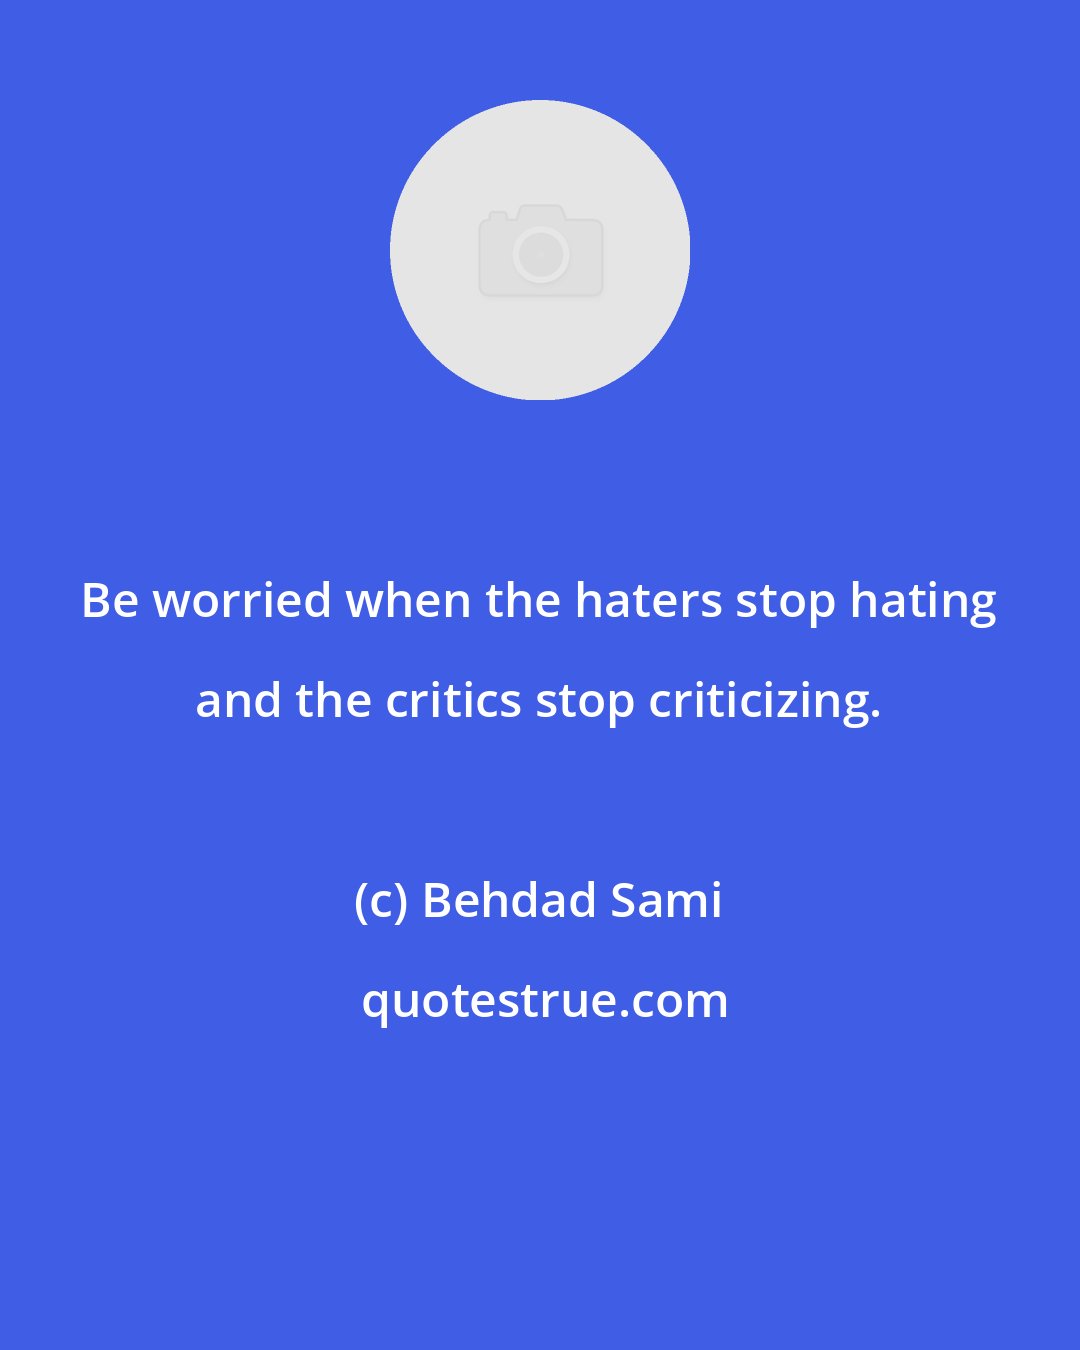 Behdad Sami: Be worried when the haters stop hating and the critics stop criticizing.